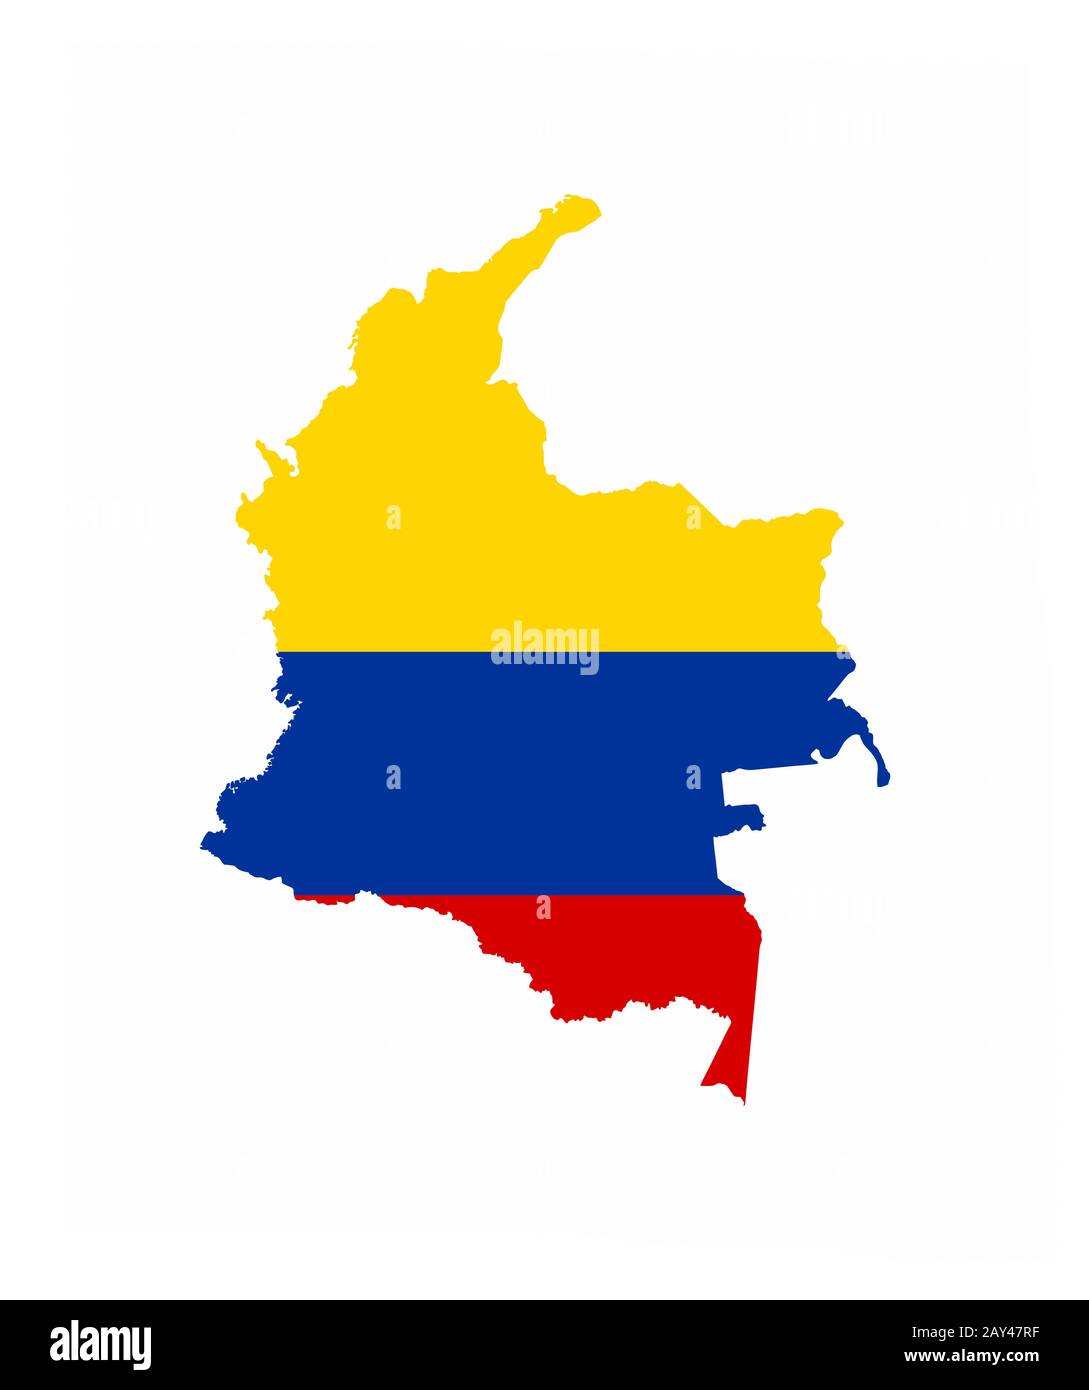 colombia flag map Stock Photo